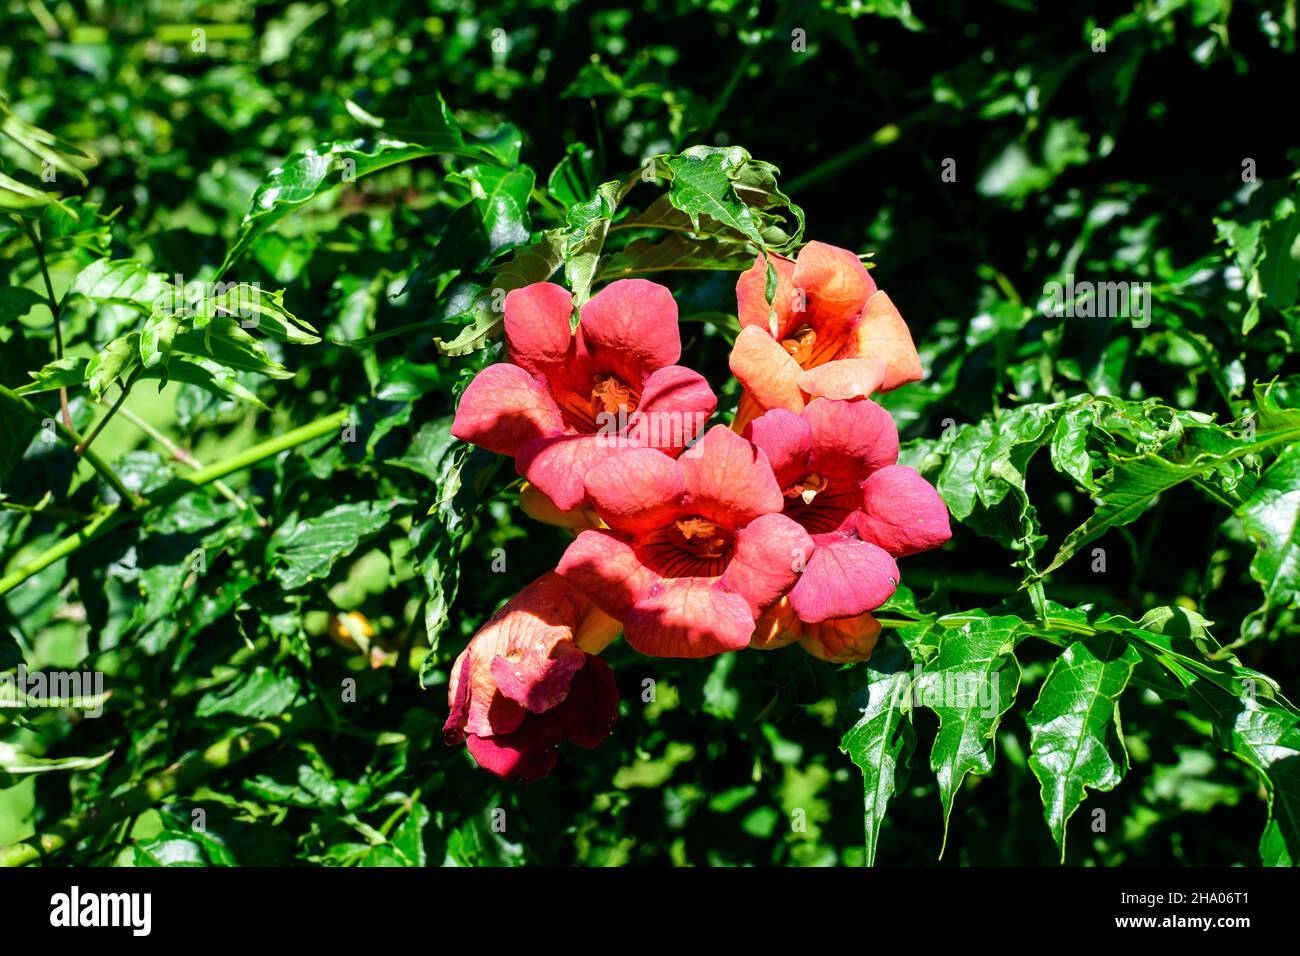 Many vivid orange red flowers and green leaves of Campsis radicans plant, commonly known as the trumpet vine or creeper, cow itch or hummingbird vine, Stock Photo